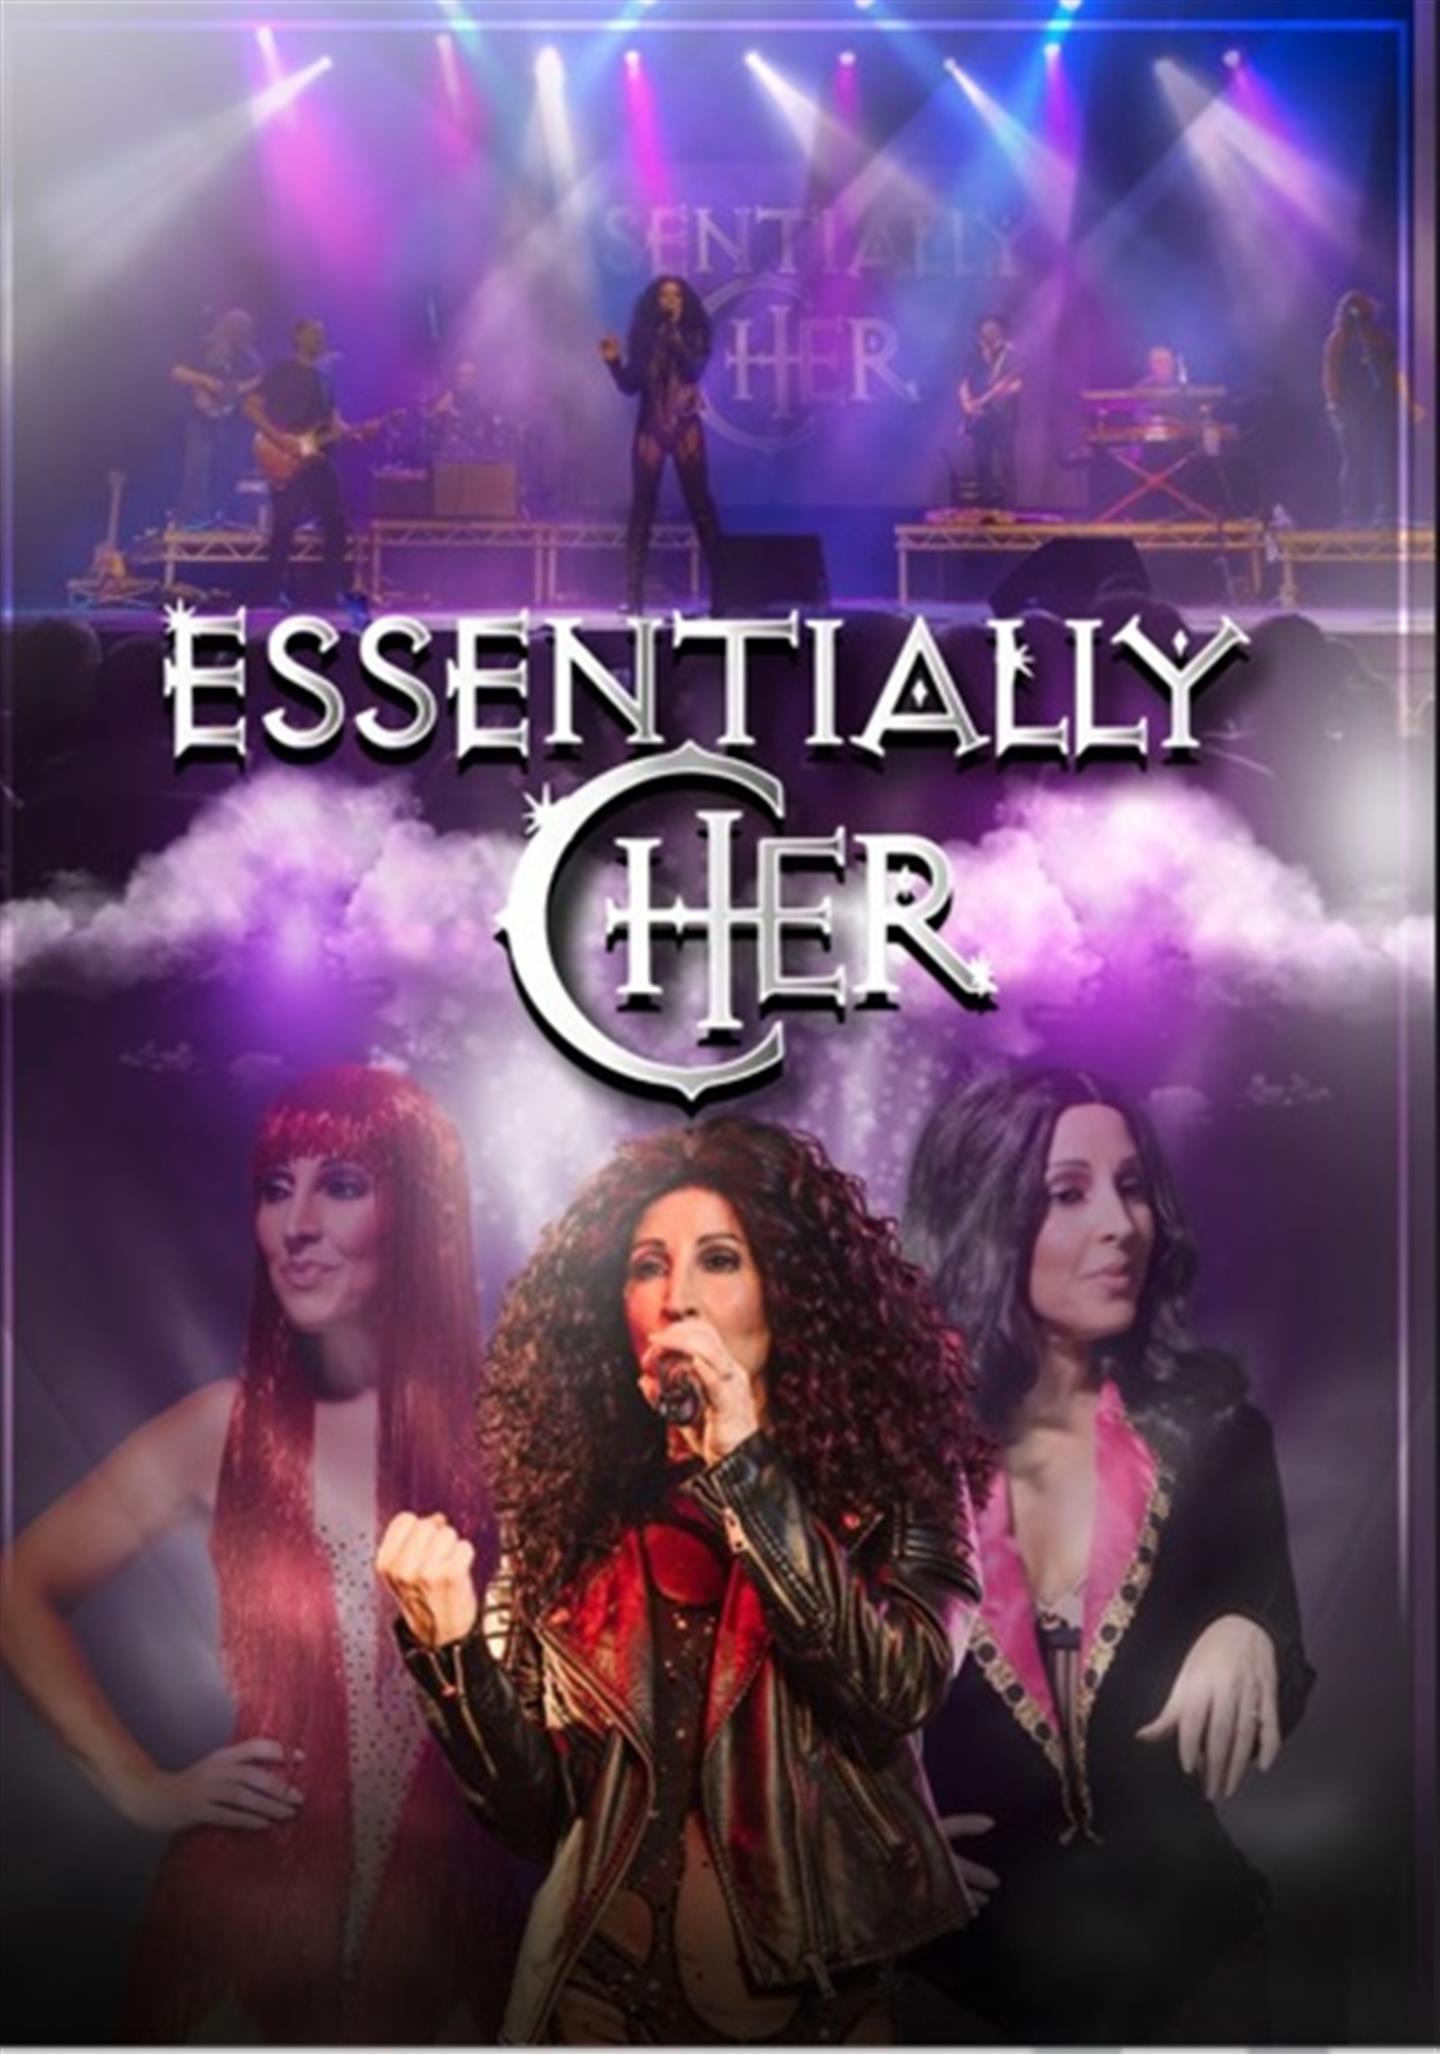 Essentially Cher - Live In Concert